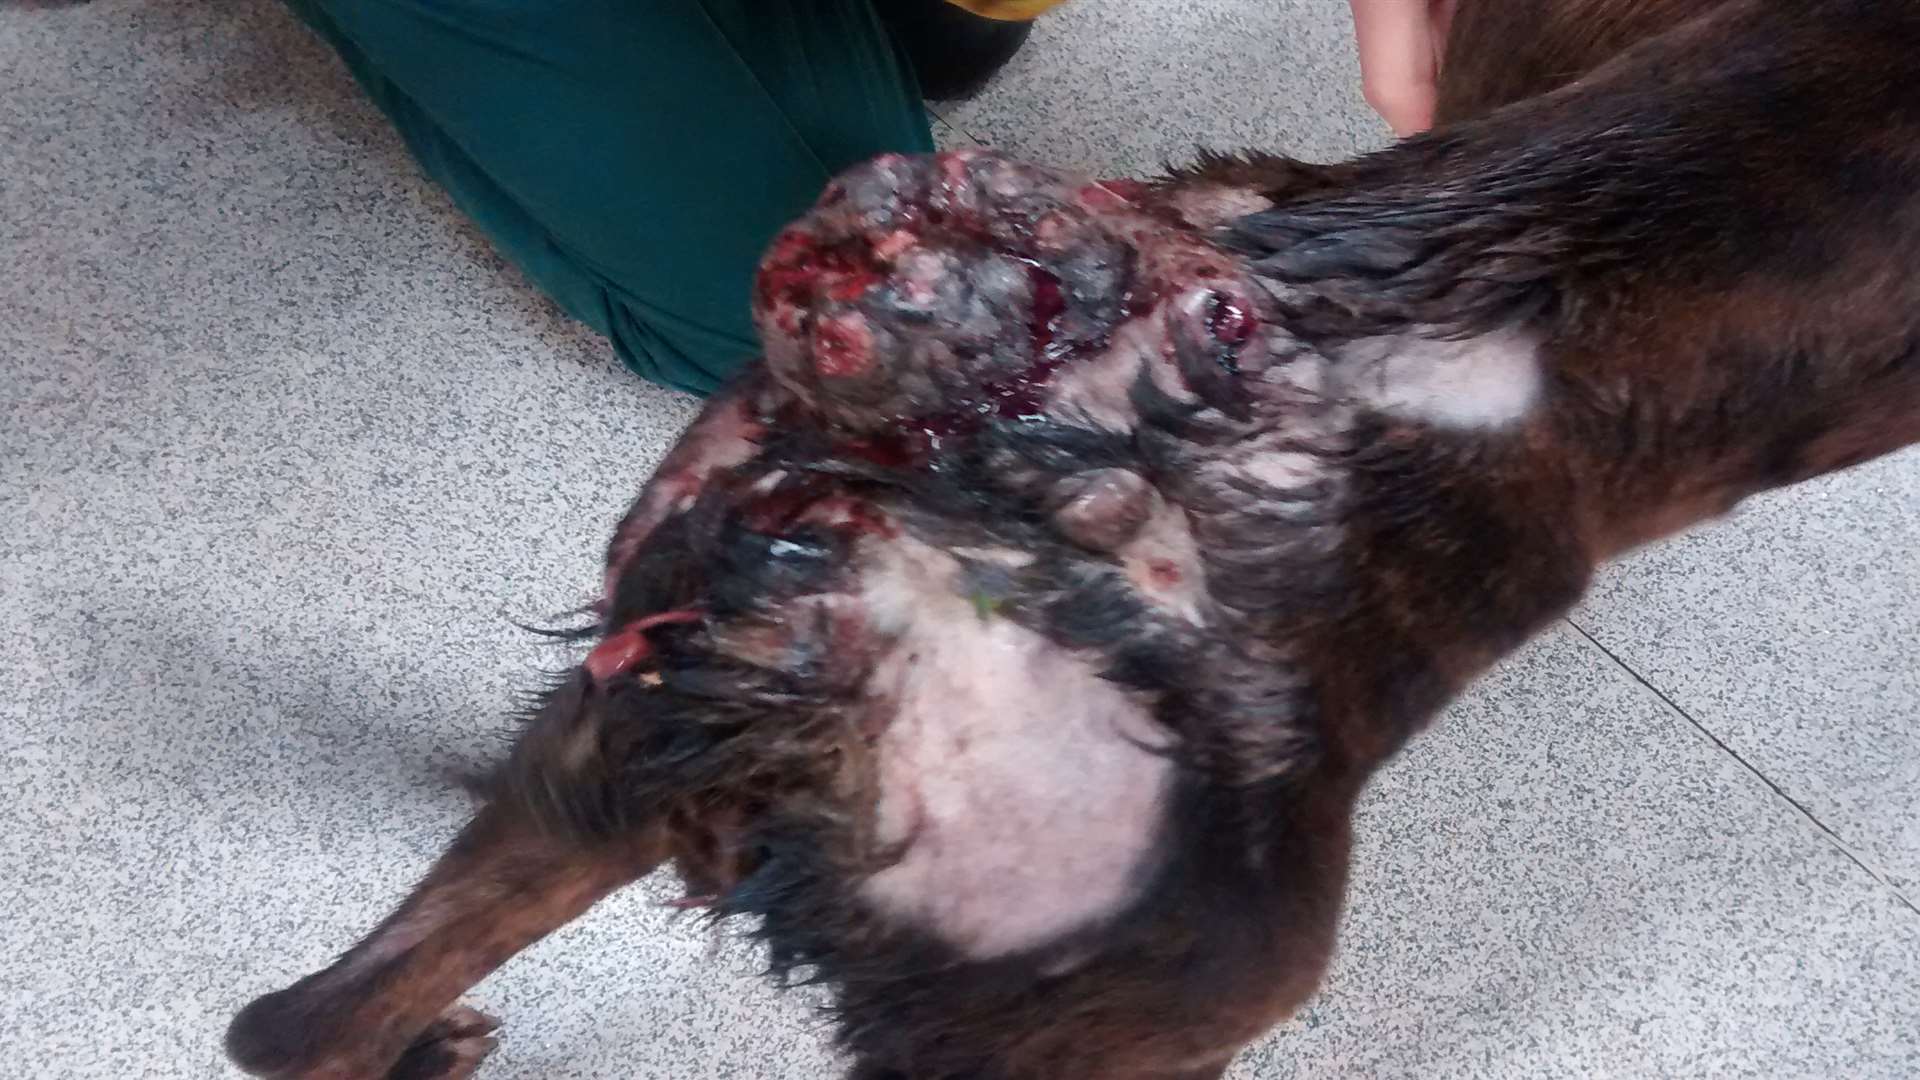 The dog had an untreated, open tumour